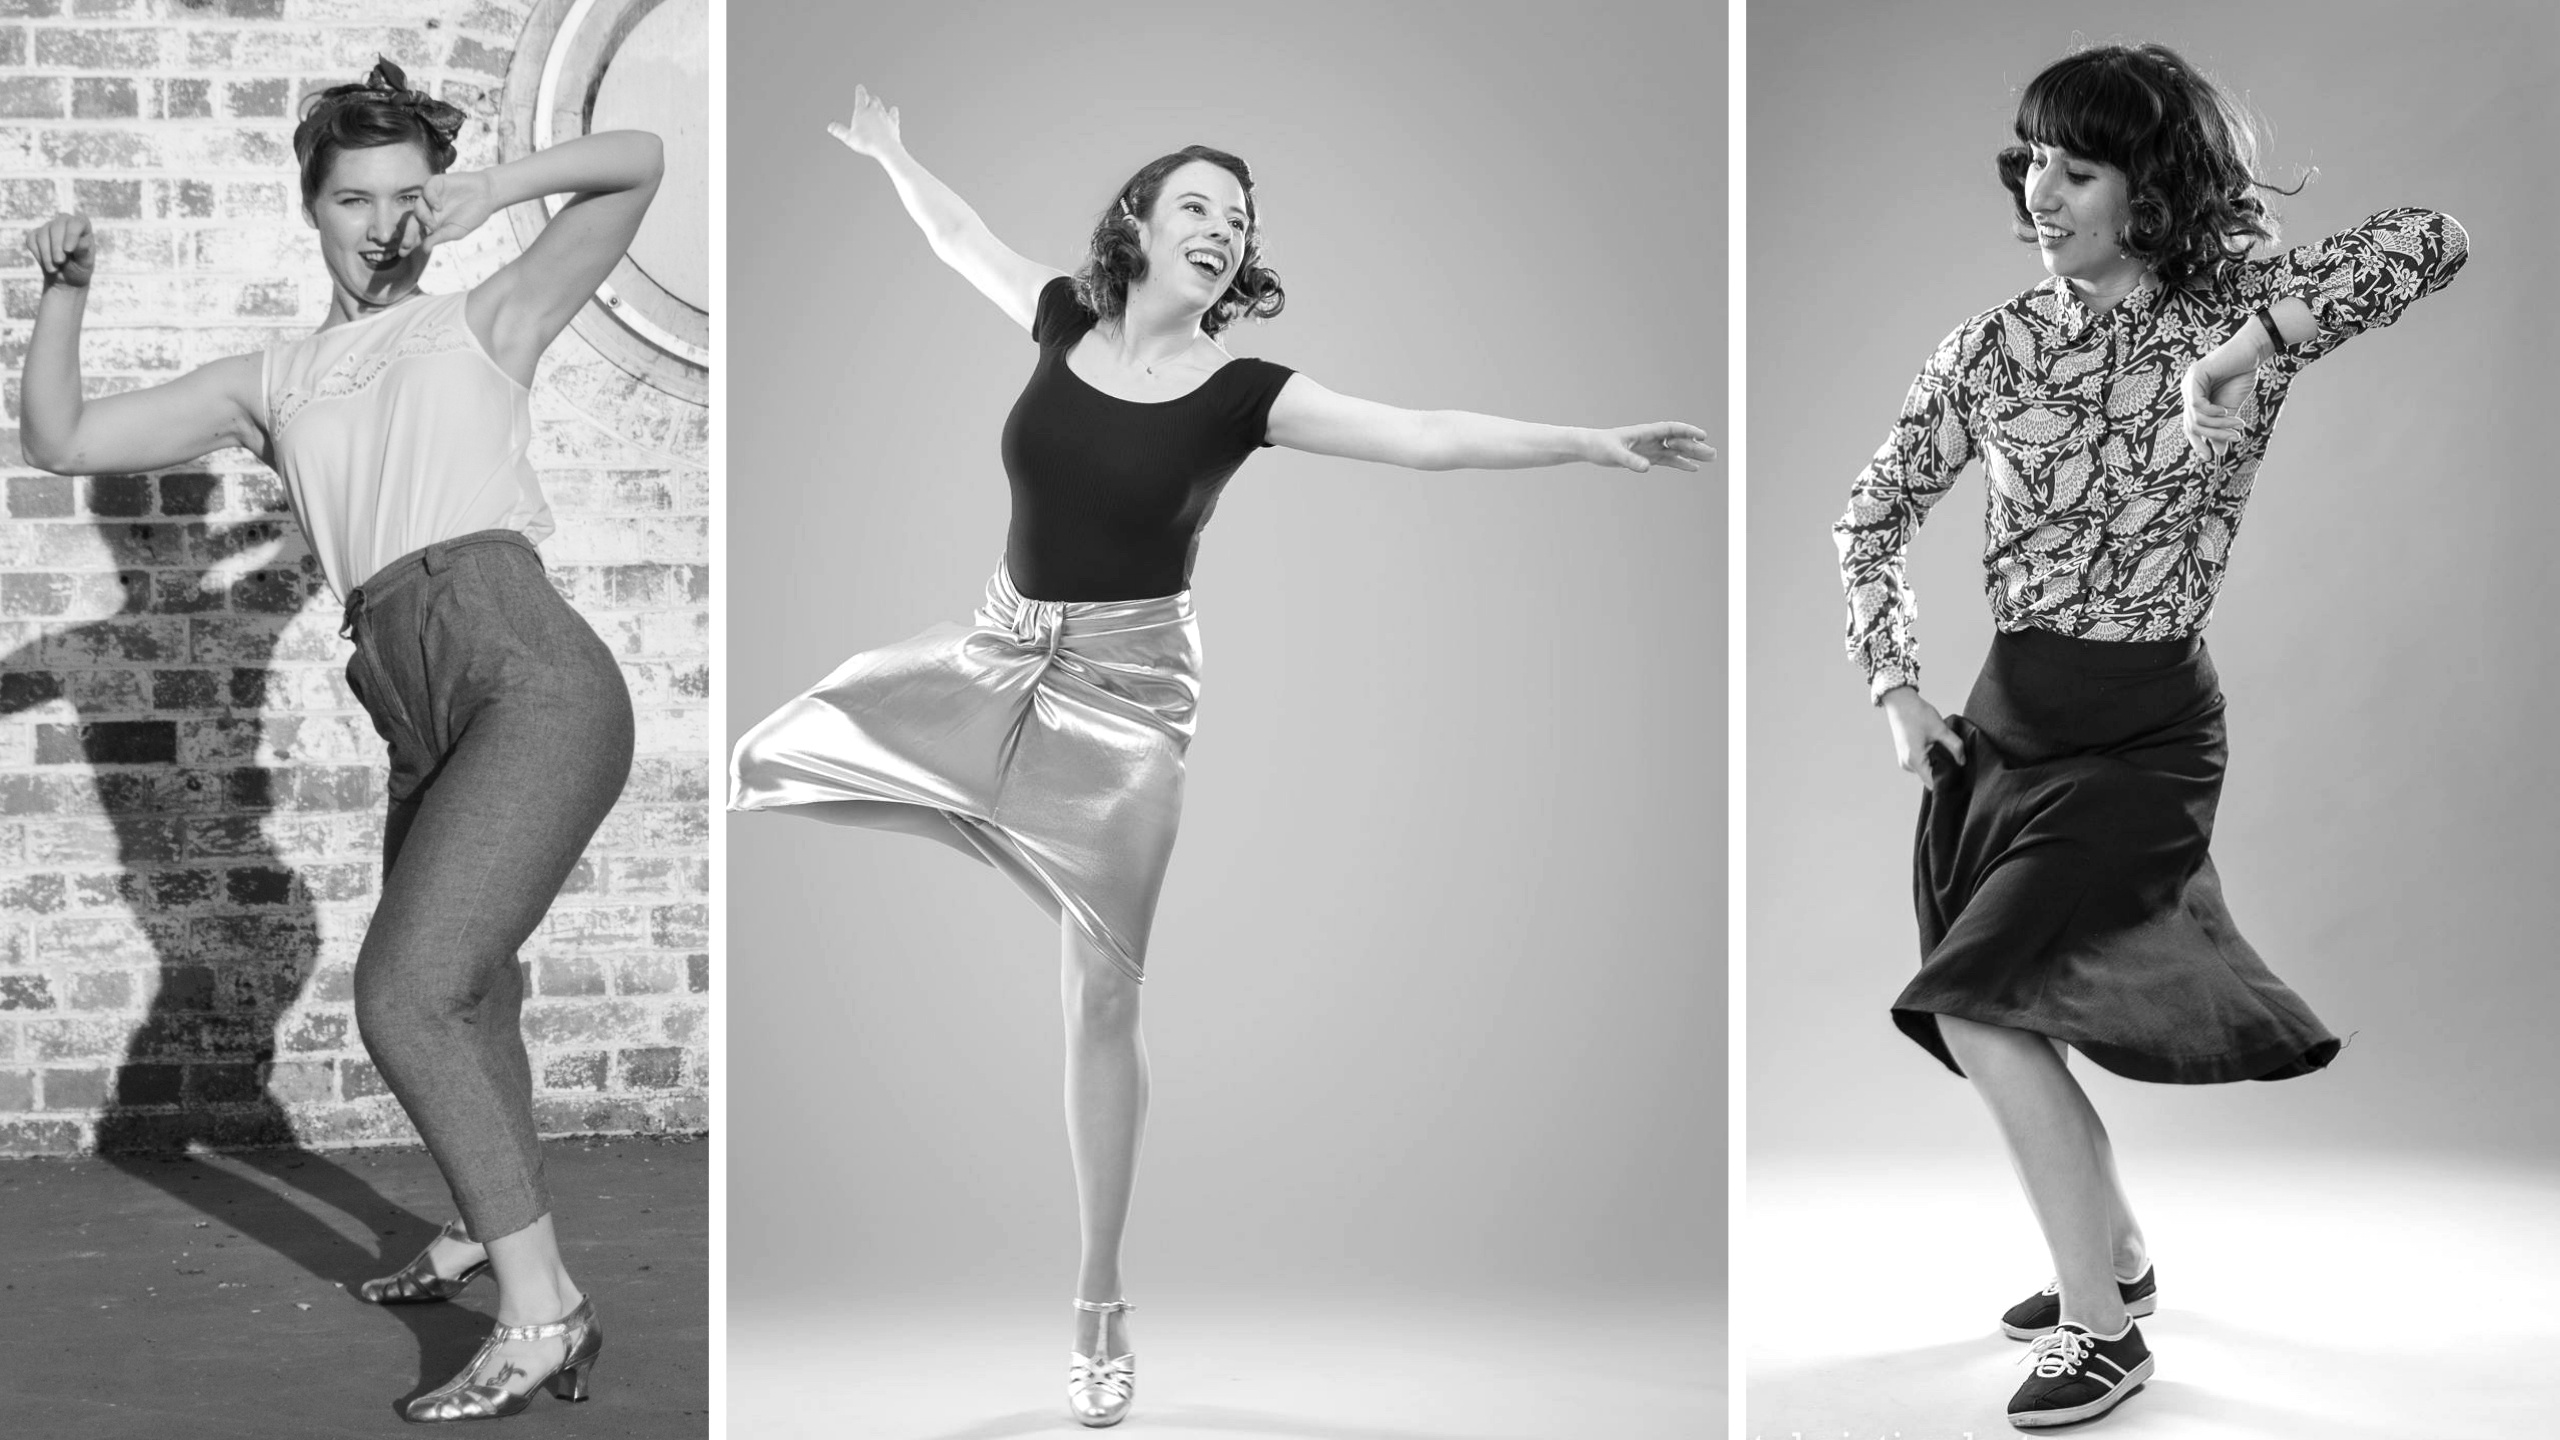 Swing Dance: Modern Dance, Artistic Dance Moves, Monochrome, Jazz Steps, Camp Hollywood Event, Dance Classes and Courses. 2560x1440 HD Background.